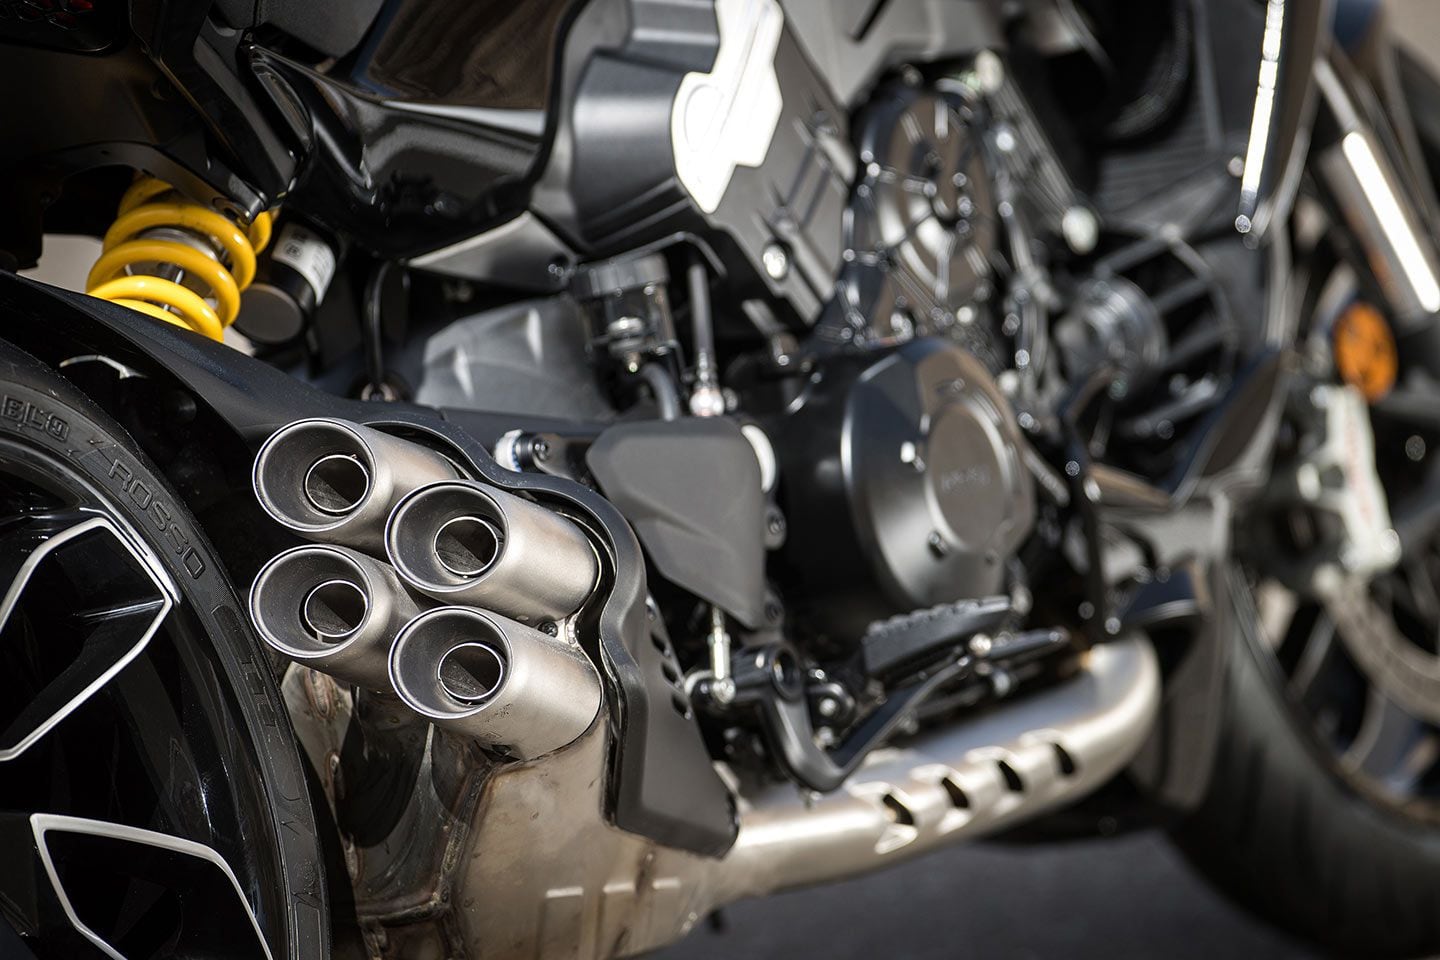 Four clustered exhaust silencers protrude from the main silencer informing you this is a V-4.